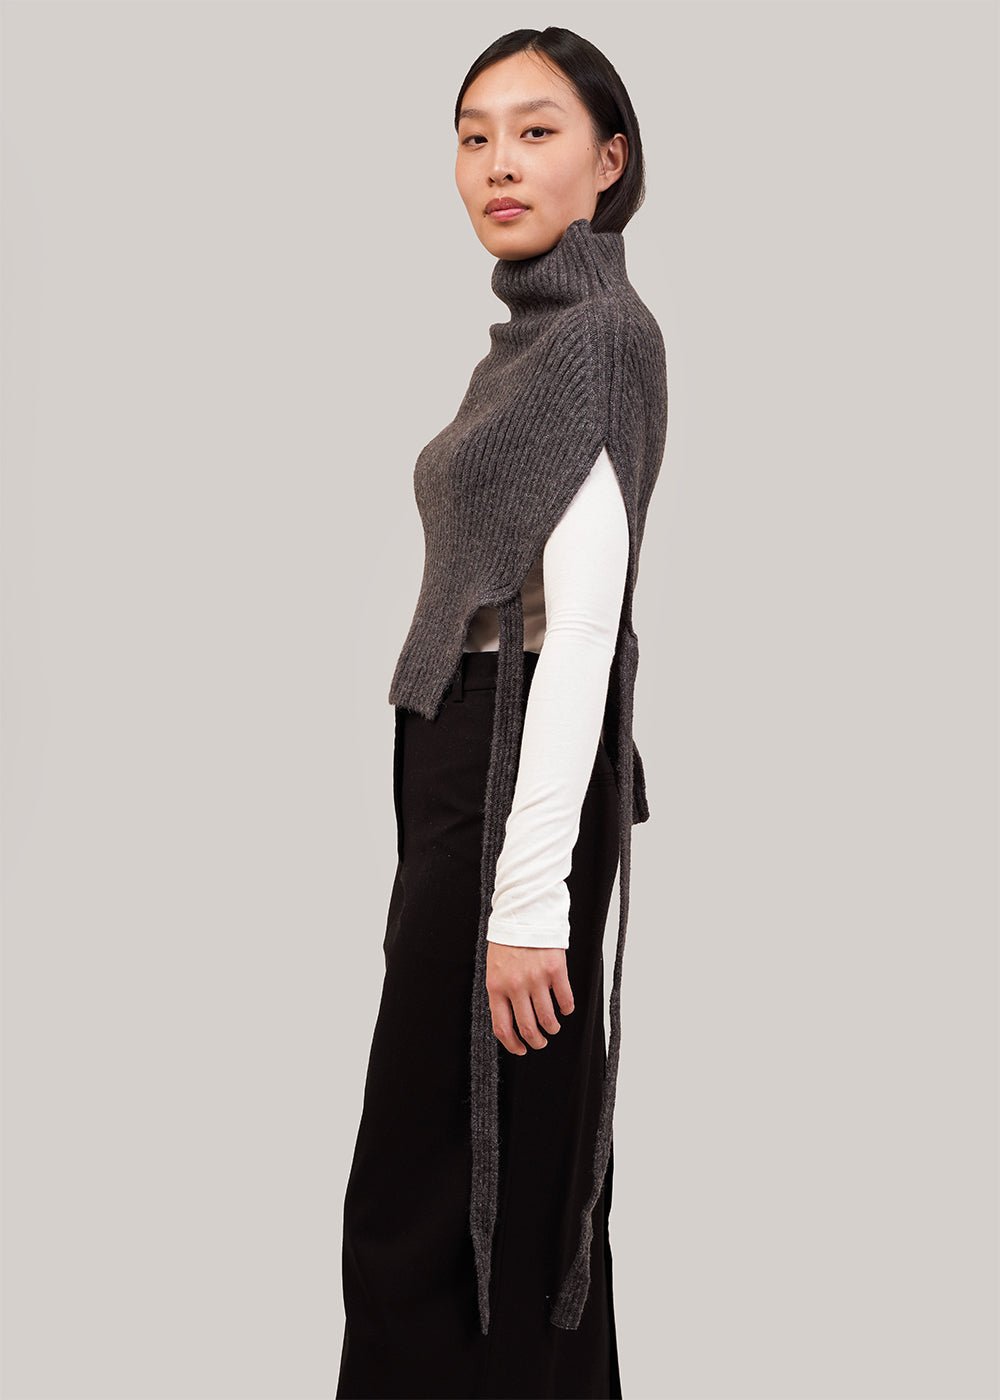 Mijeong Park Charcoal Neck Warmer - New Classics Studios Sustainable Ethical Fashion Canada